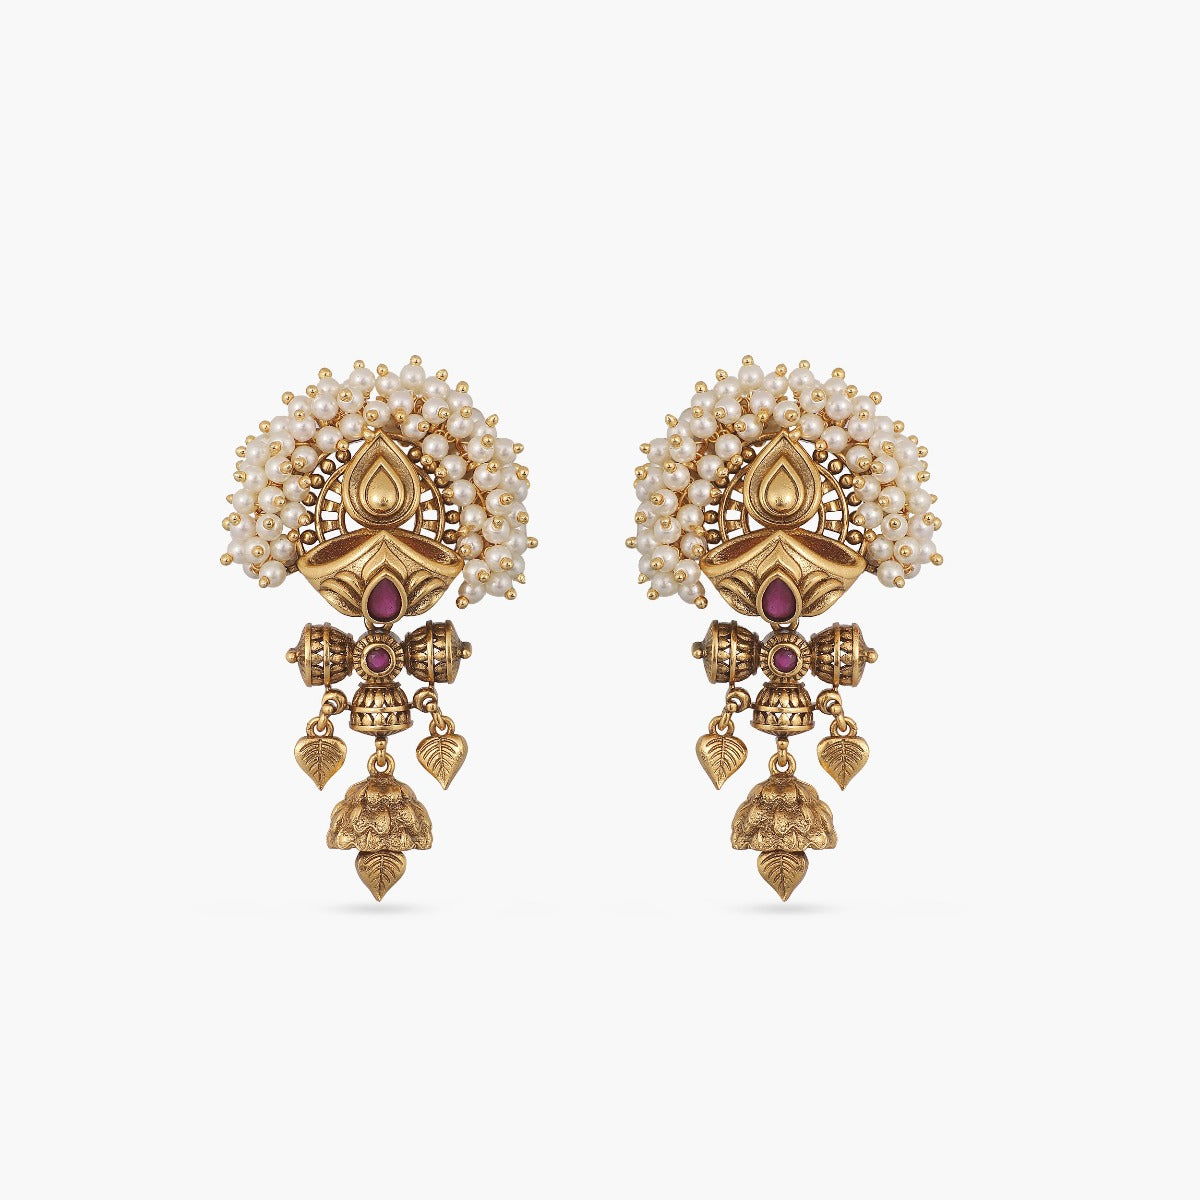 A picture of a pair of Indian antique gold plated earrings with a red gem and pearl details.